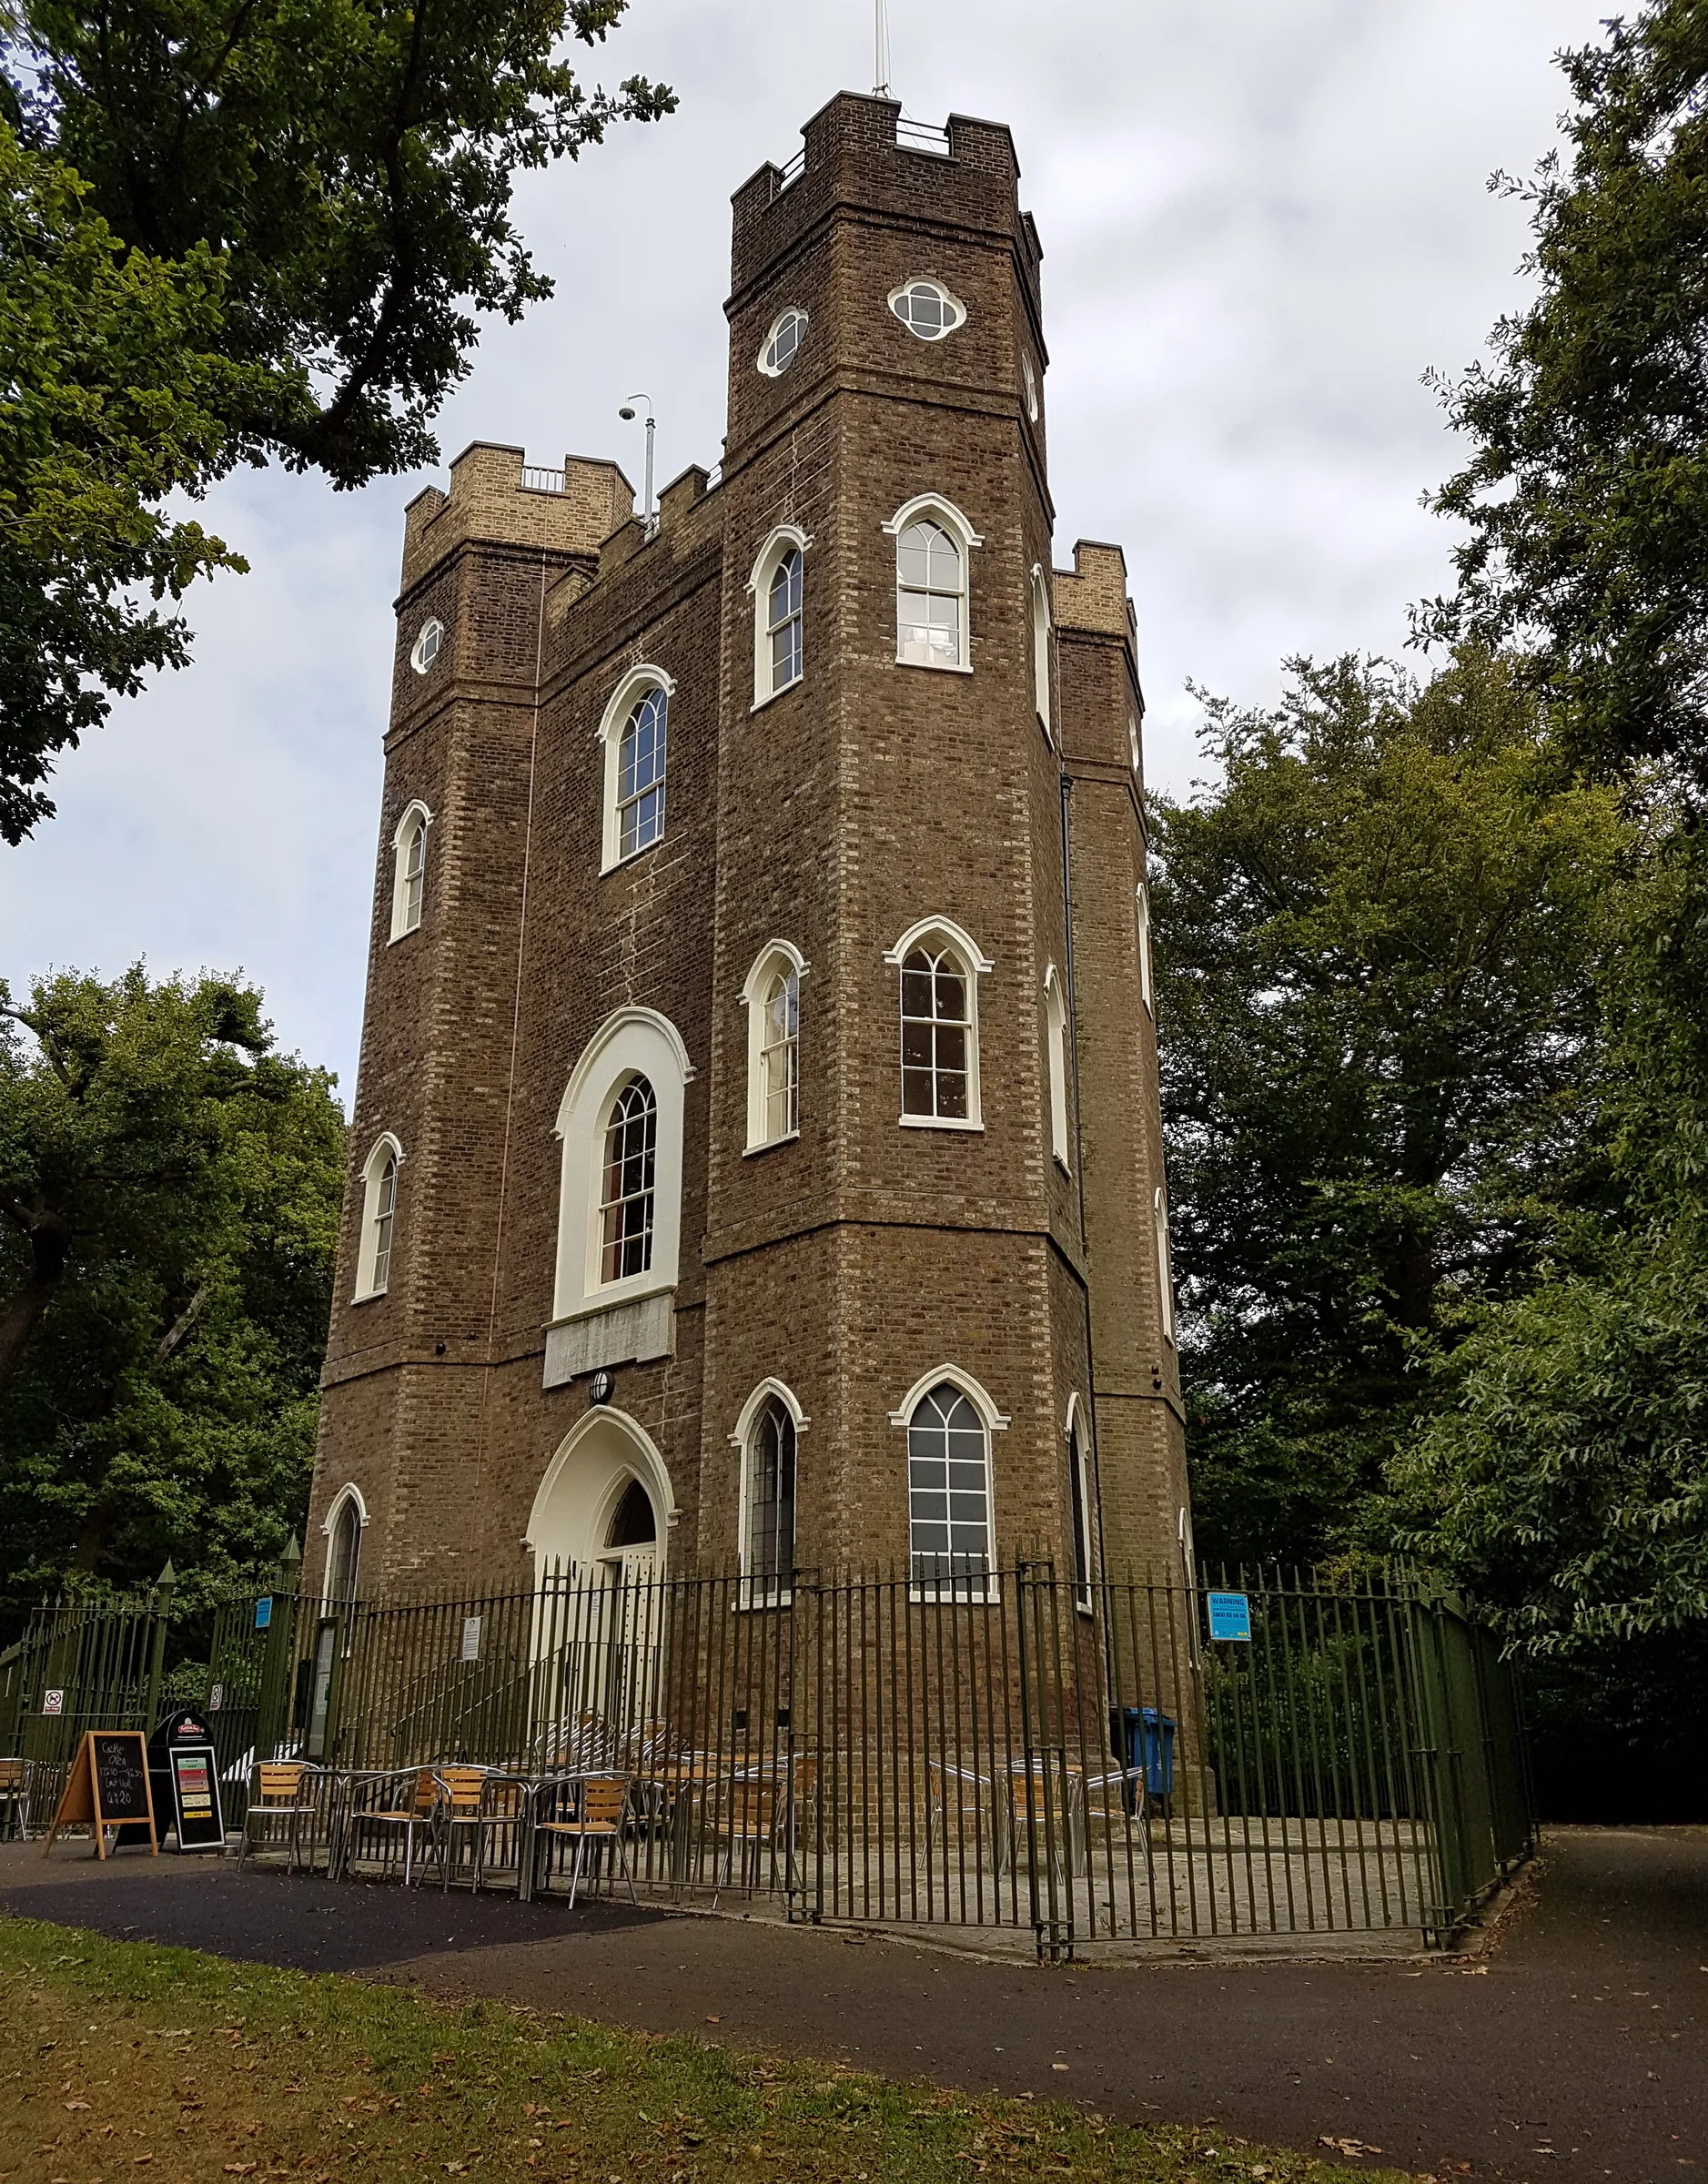 Photo showing: Severndroog Castle, an 18th-century folly in Oxleas Wood (Castlewood), Shooter's Hill, Royal Borough of Greenwich, London, UK.